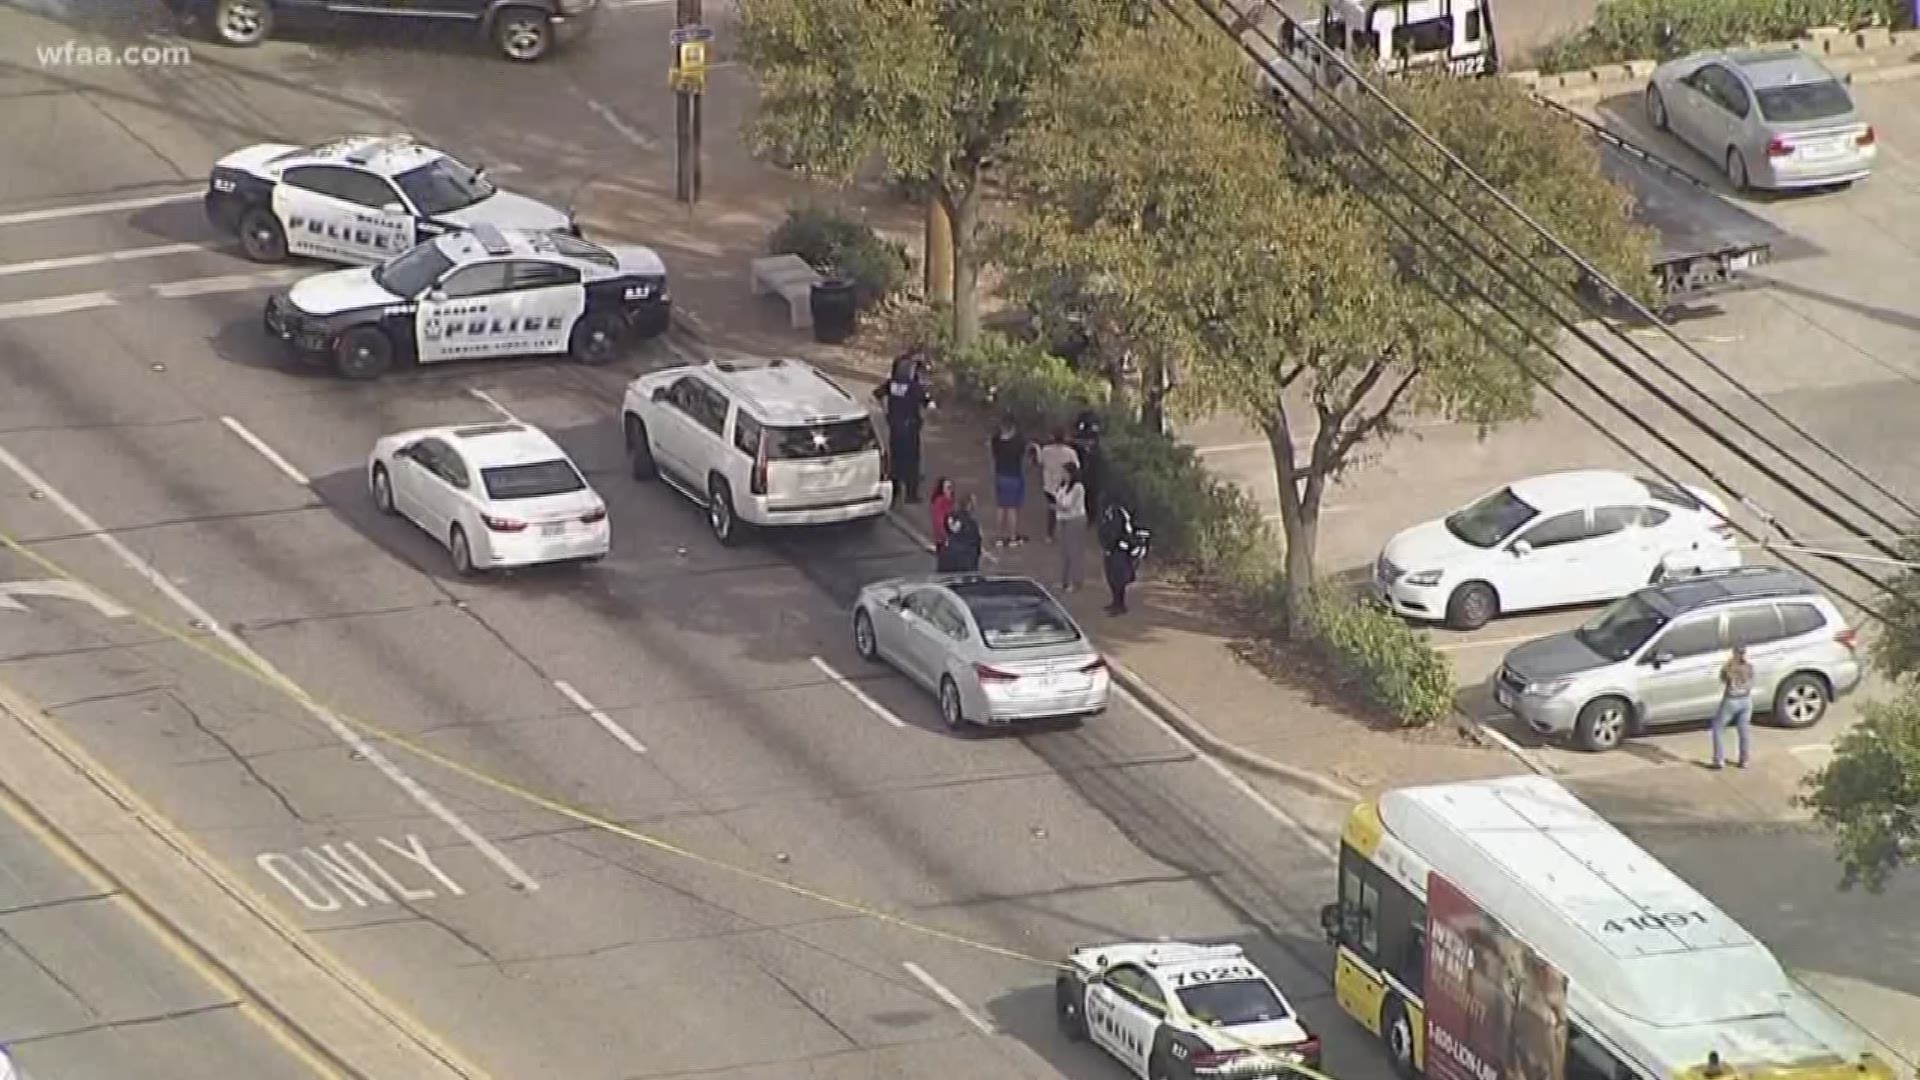 An officer shot a man after he witnessed the male shoot someone in Dallas, police say.